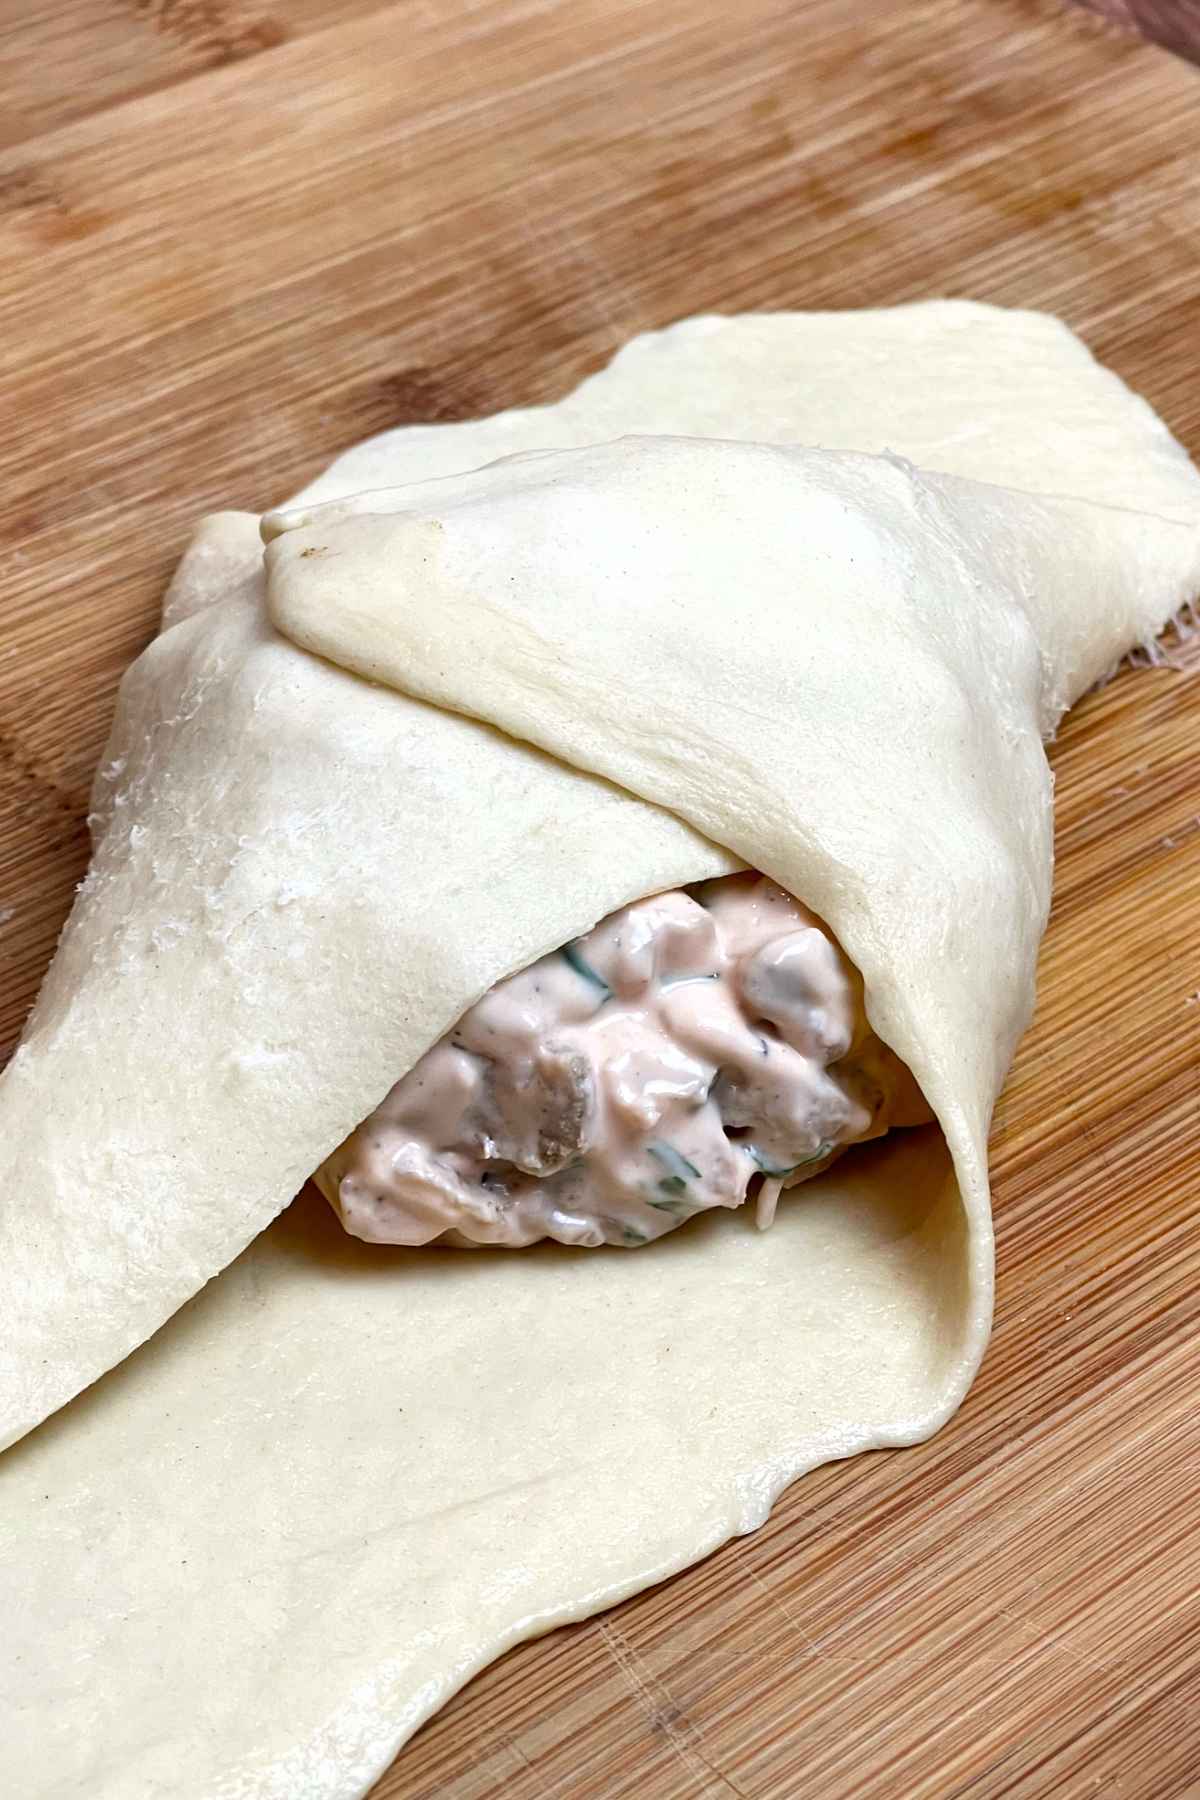 Wrapping the crescent dough around the chicken filling.